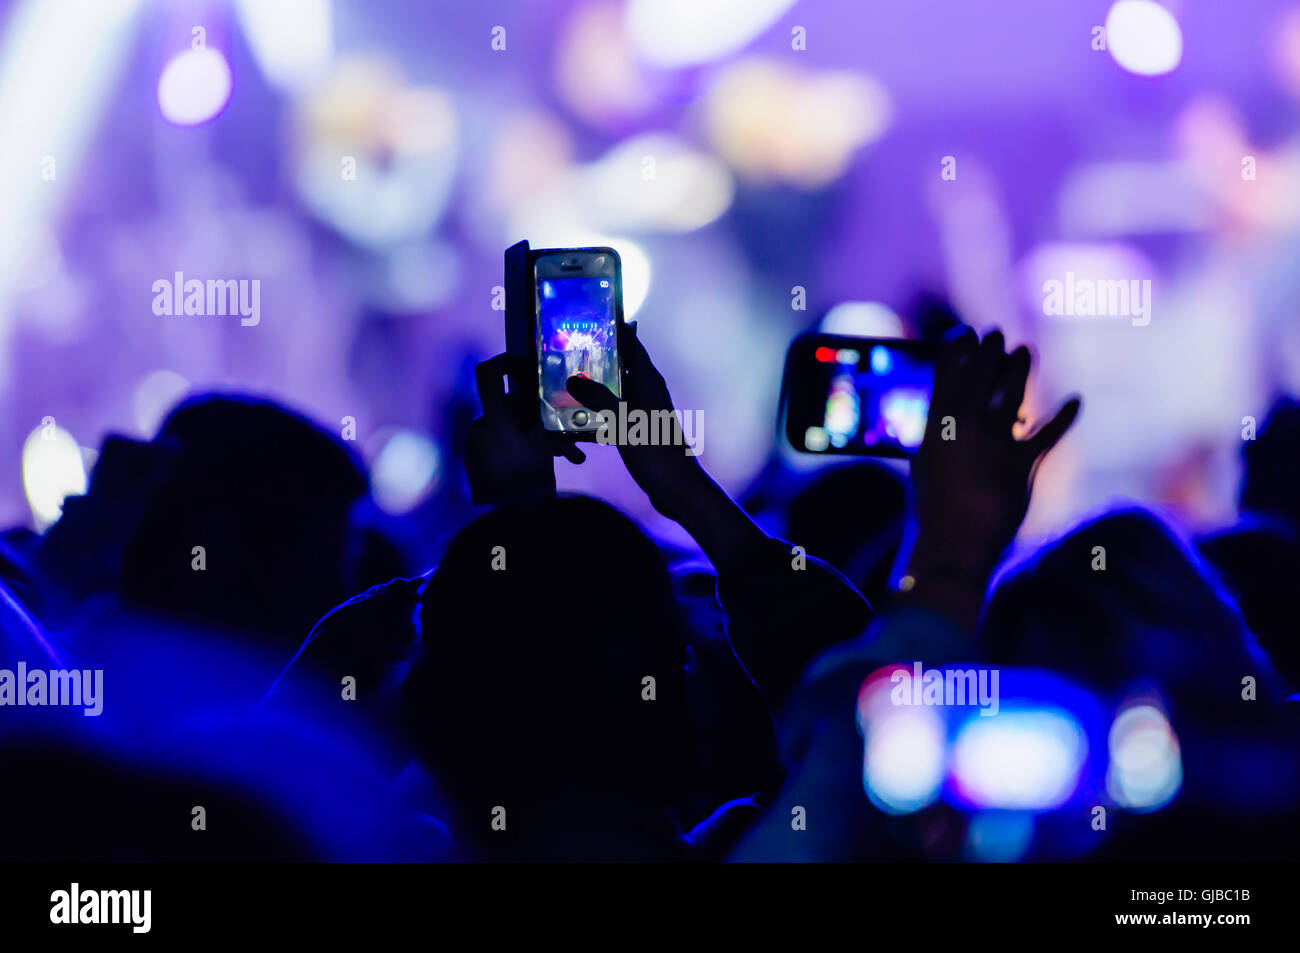 Members of the audience video record a performance at a music concert using their smartphones. Stock Photo